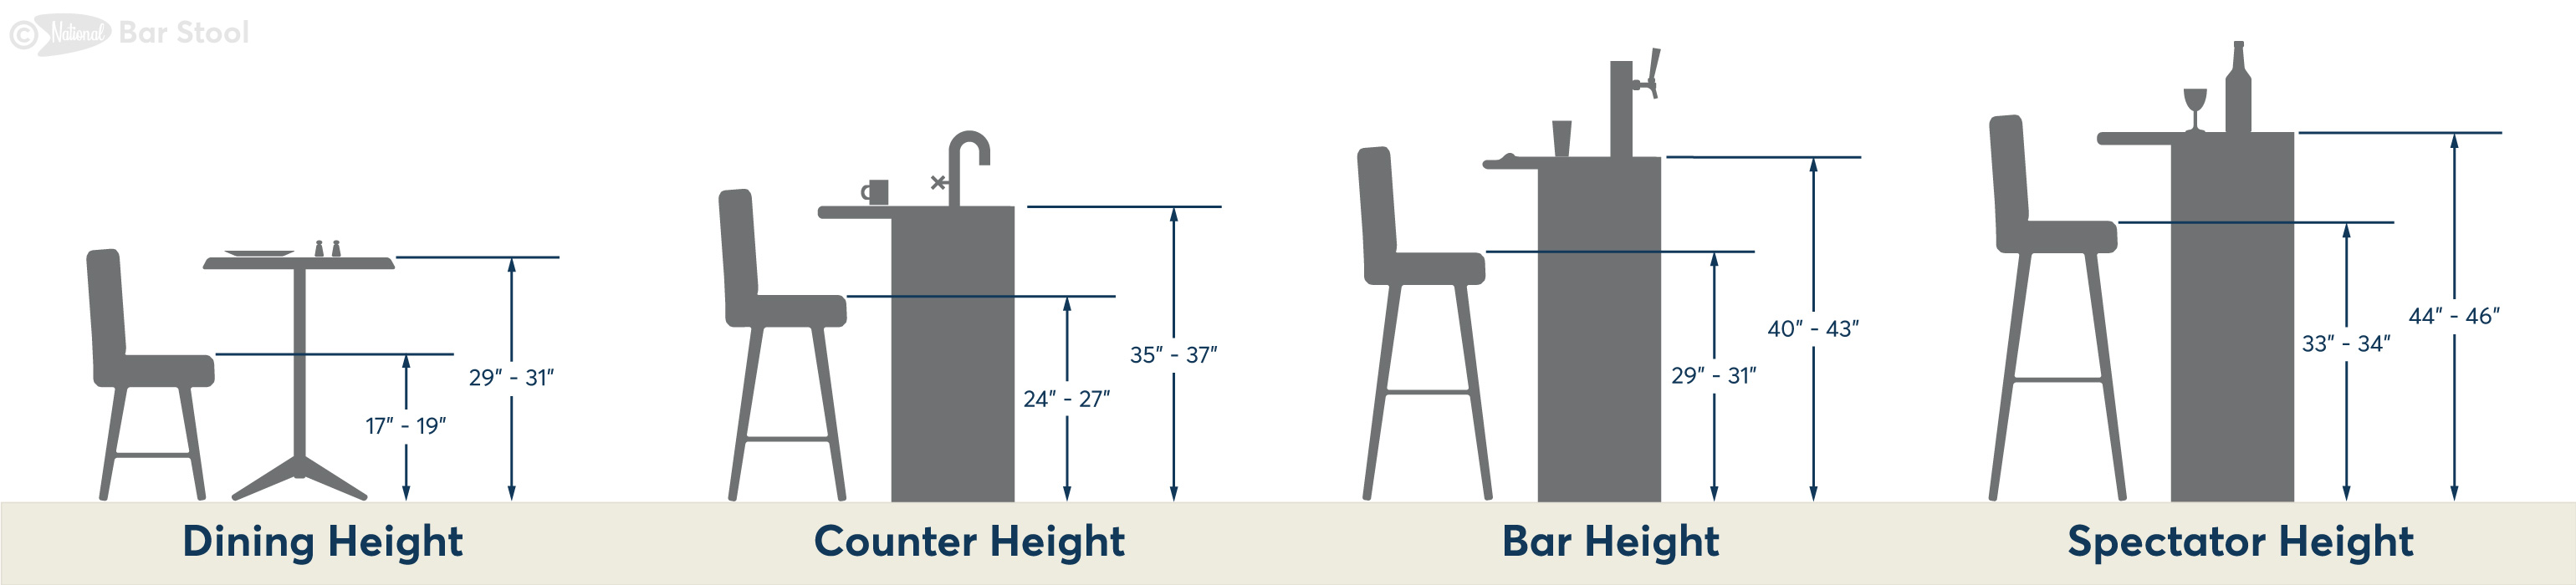 Bar Stool Ing Guide National, What Height Should Your Bar Stool Be